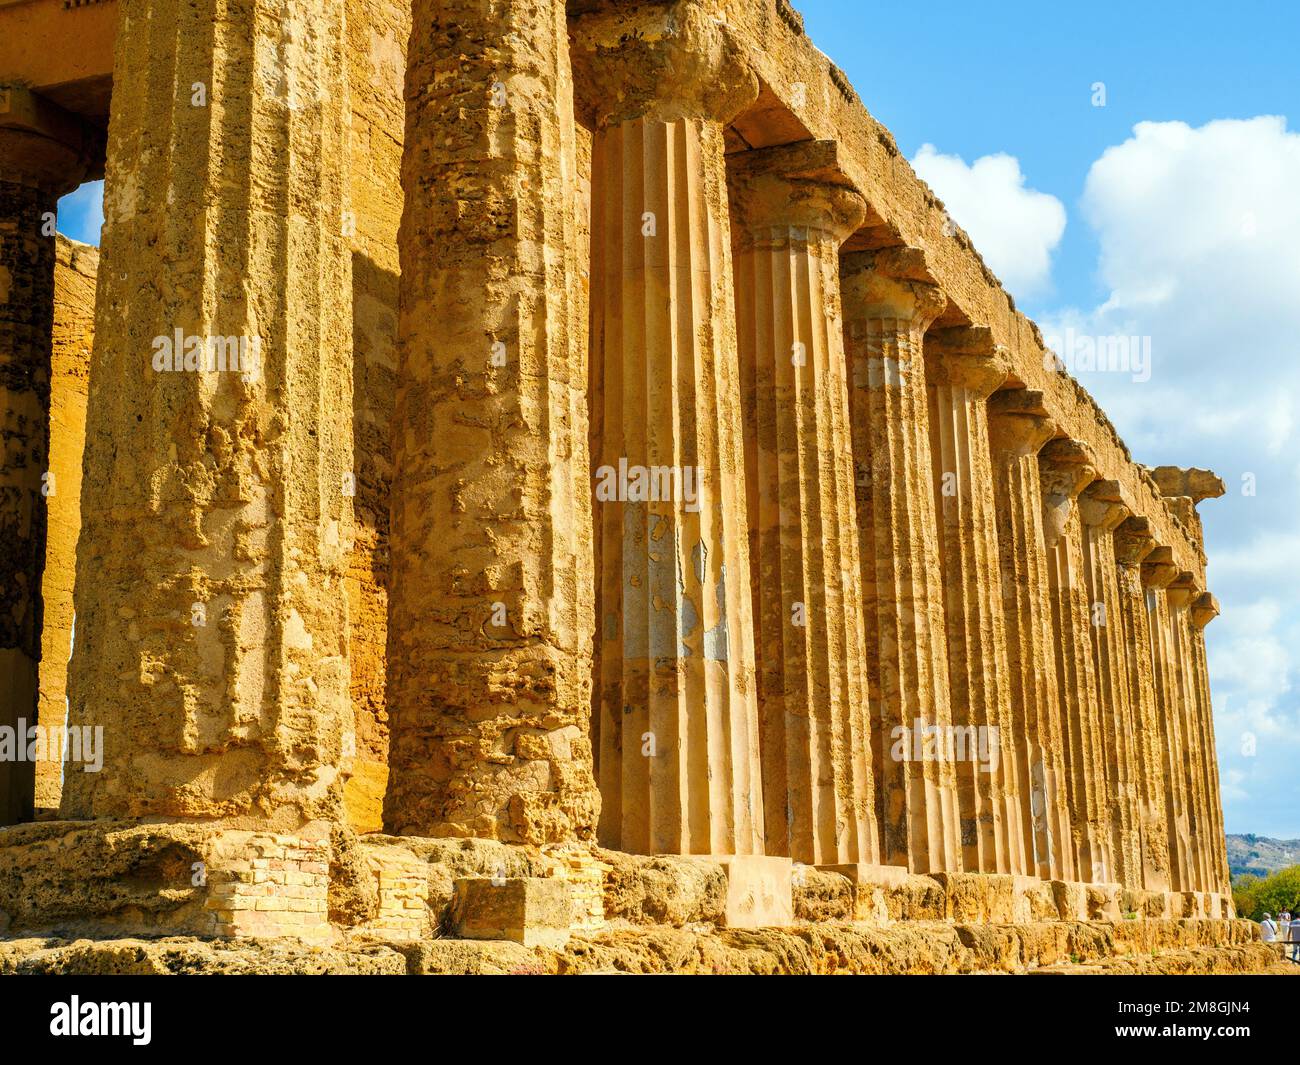 Temple of Concordia - Valley of the Temples archaeological site - Agrigento, Sicily, Italy Stock Photo